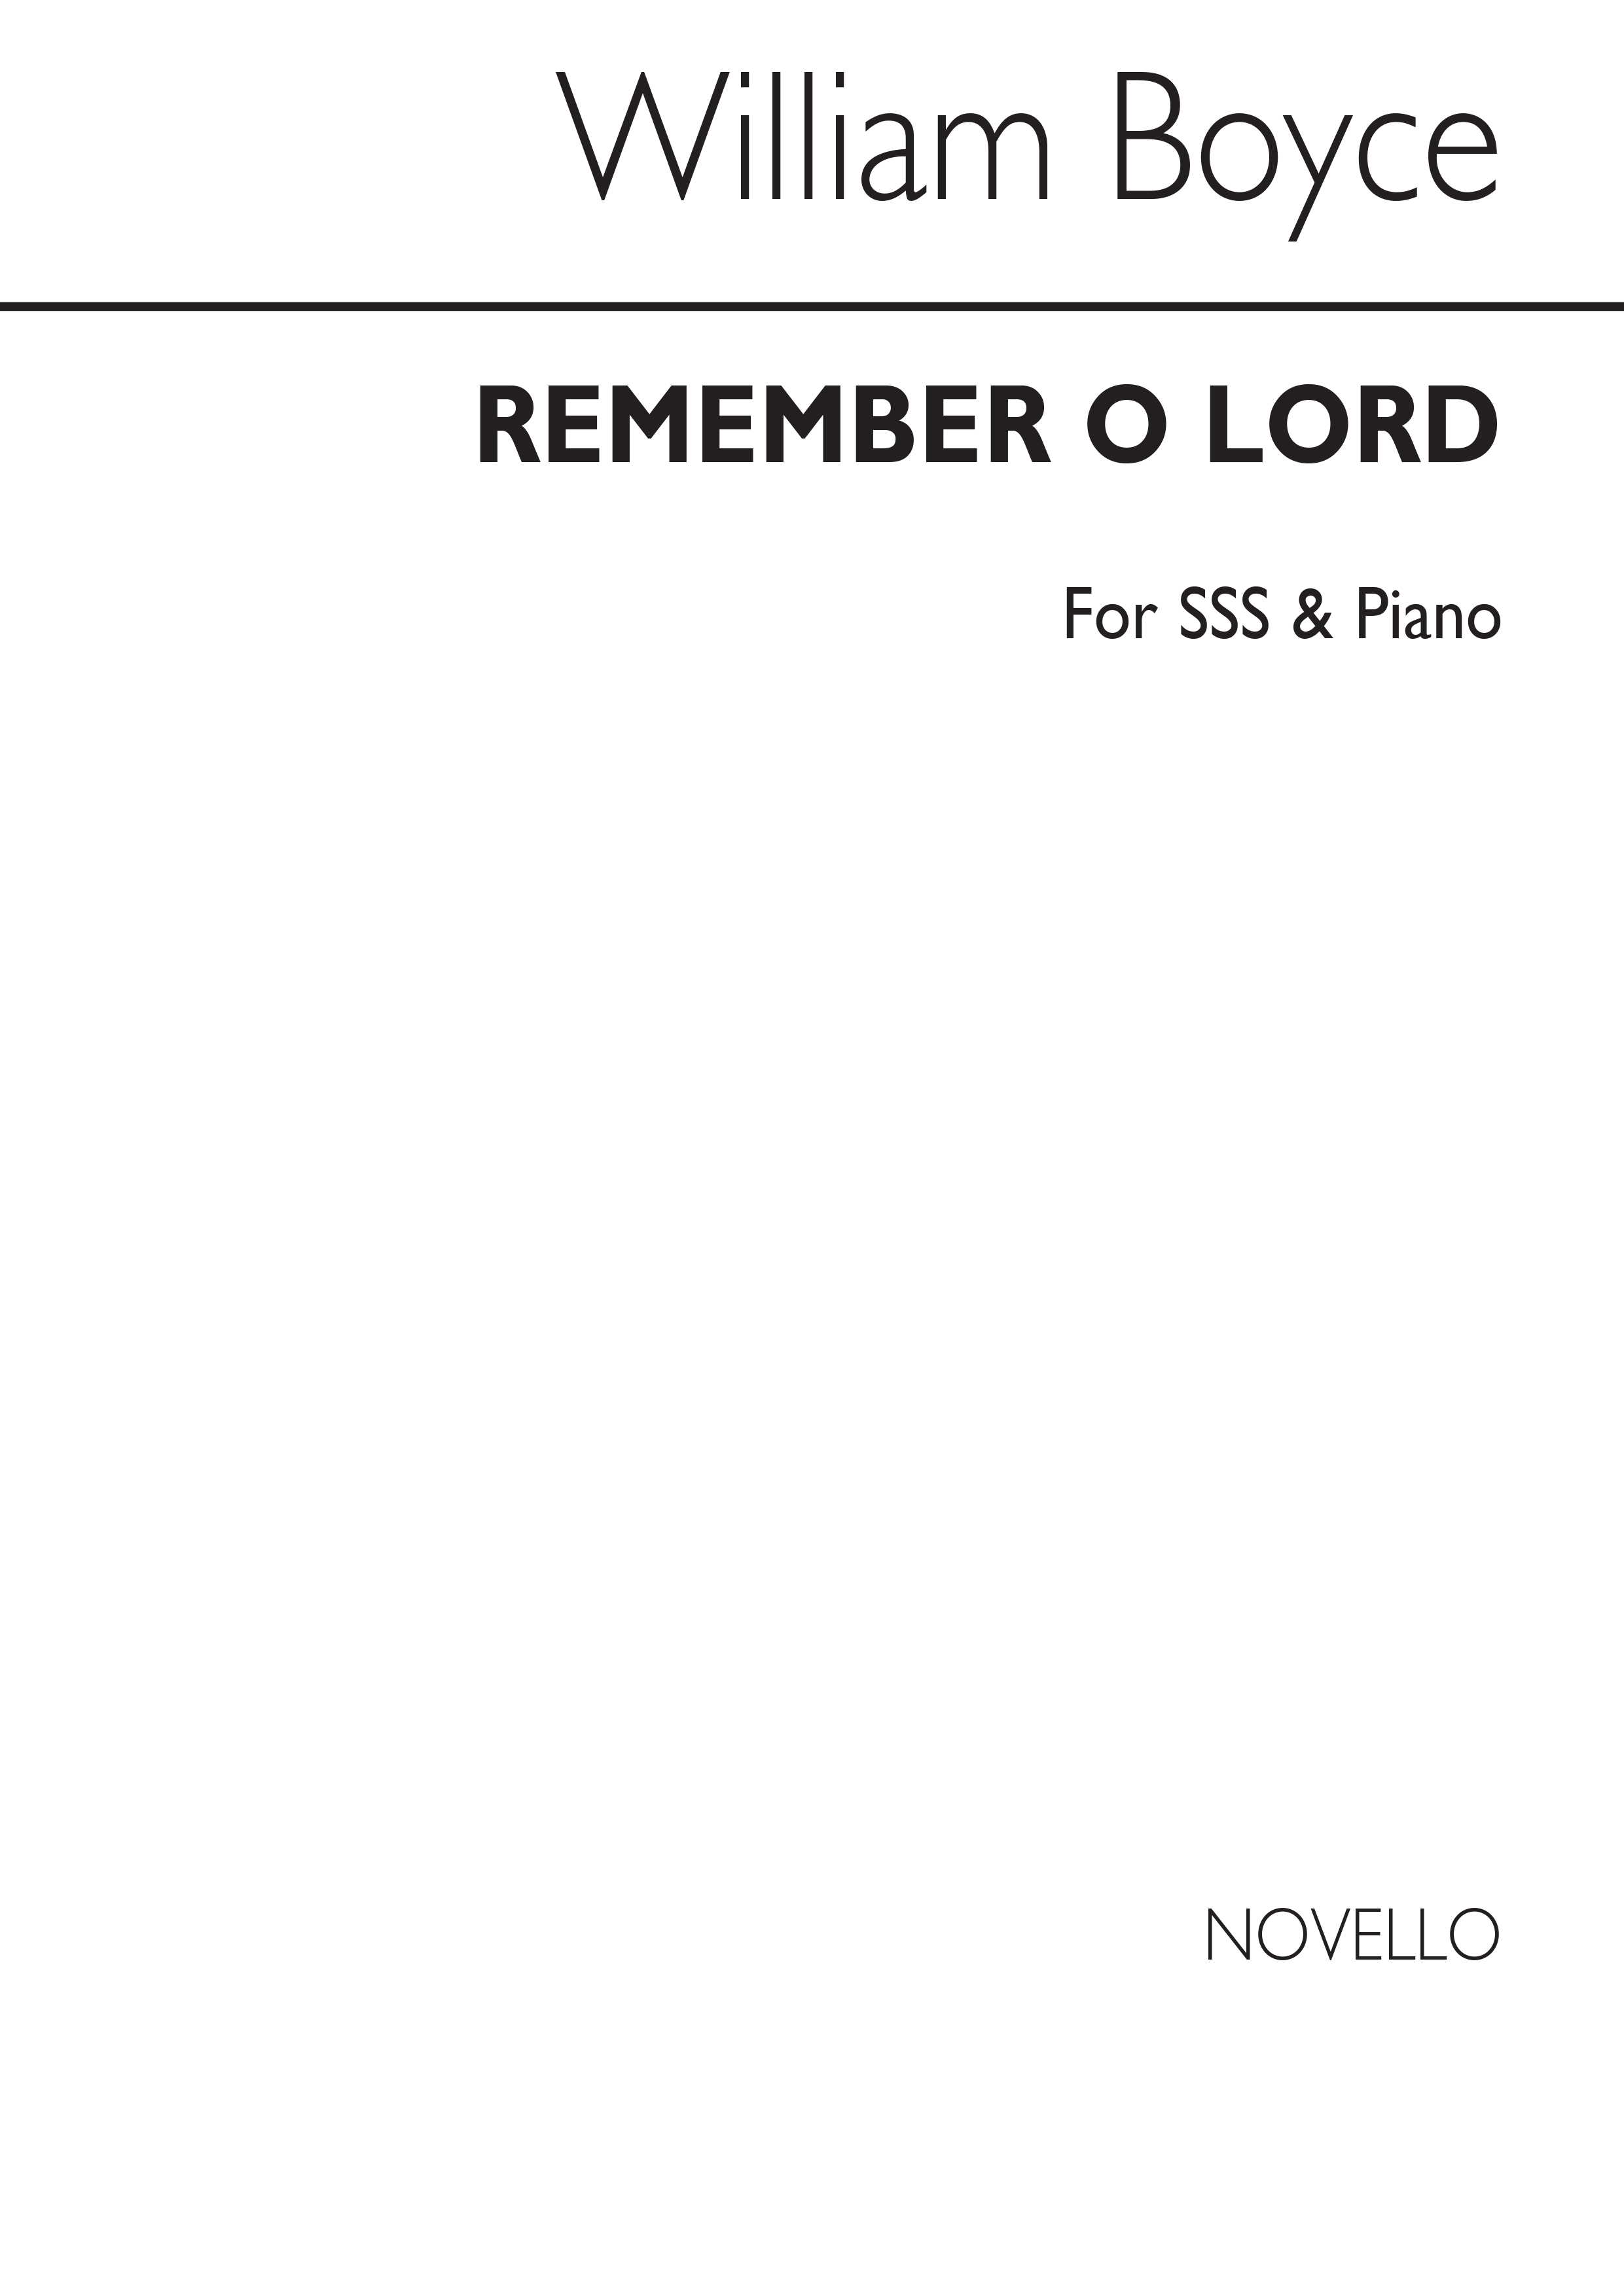 William Boyce: Remember O Lord Sss/Piano: Upper Voices: Vocal Score